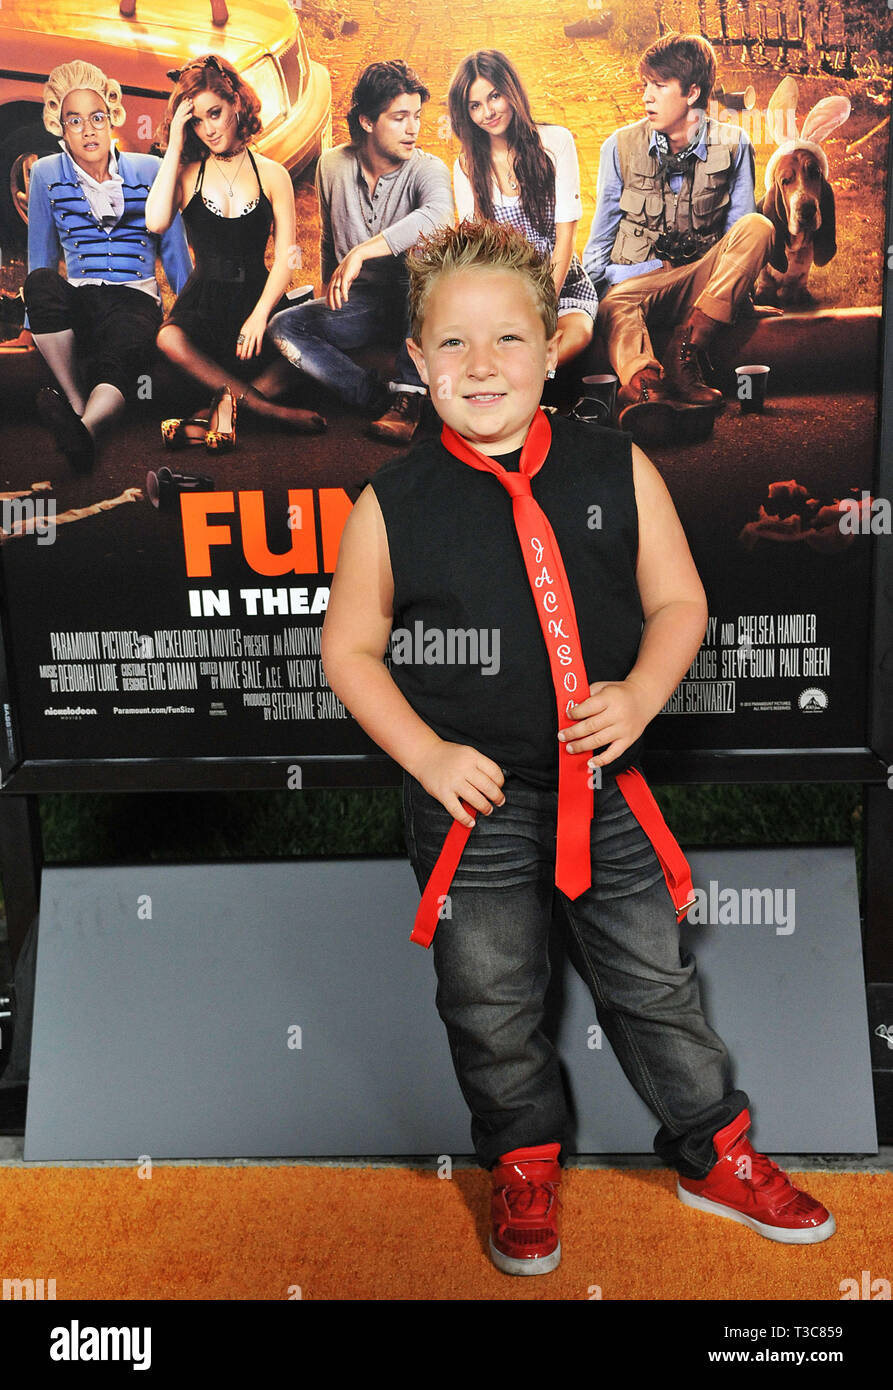 Jackson Nicoll  at the Fun Size Premiere at the Paramount studio Theatre in Los Angeles.Jackson Nicoll  11  Event in Hollywood Life - California, Red Carpet Event, USA, Film Industry, Celebrities, Photography, Bestof, Arts Culture and Entertainment, Topix Celebrities fashion, Best of, Hollywood Life, Event in Hollywood Life - California, Red Carpet and backstage, movie celebrities, TV celebrities, Music celebrities, Topix, Bestof, Arts Culture and Entertainment, vertical, one person, Photography,   Fashion, full length, 2012 inquiry tsuni@Gamma-USA.com , Credit Tsuni / USA, Stock Photo